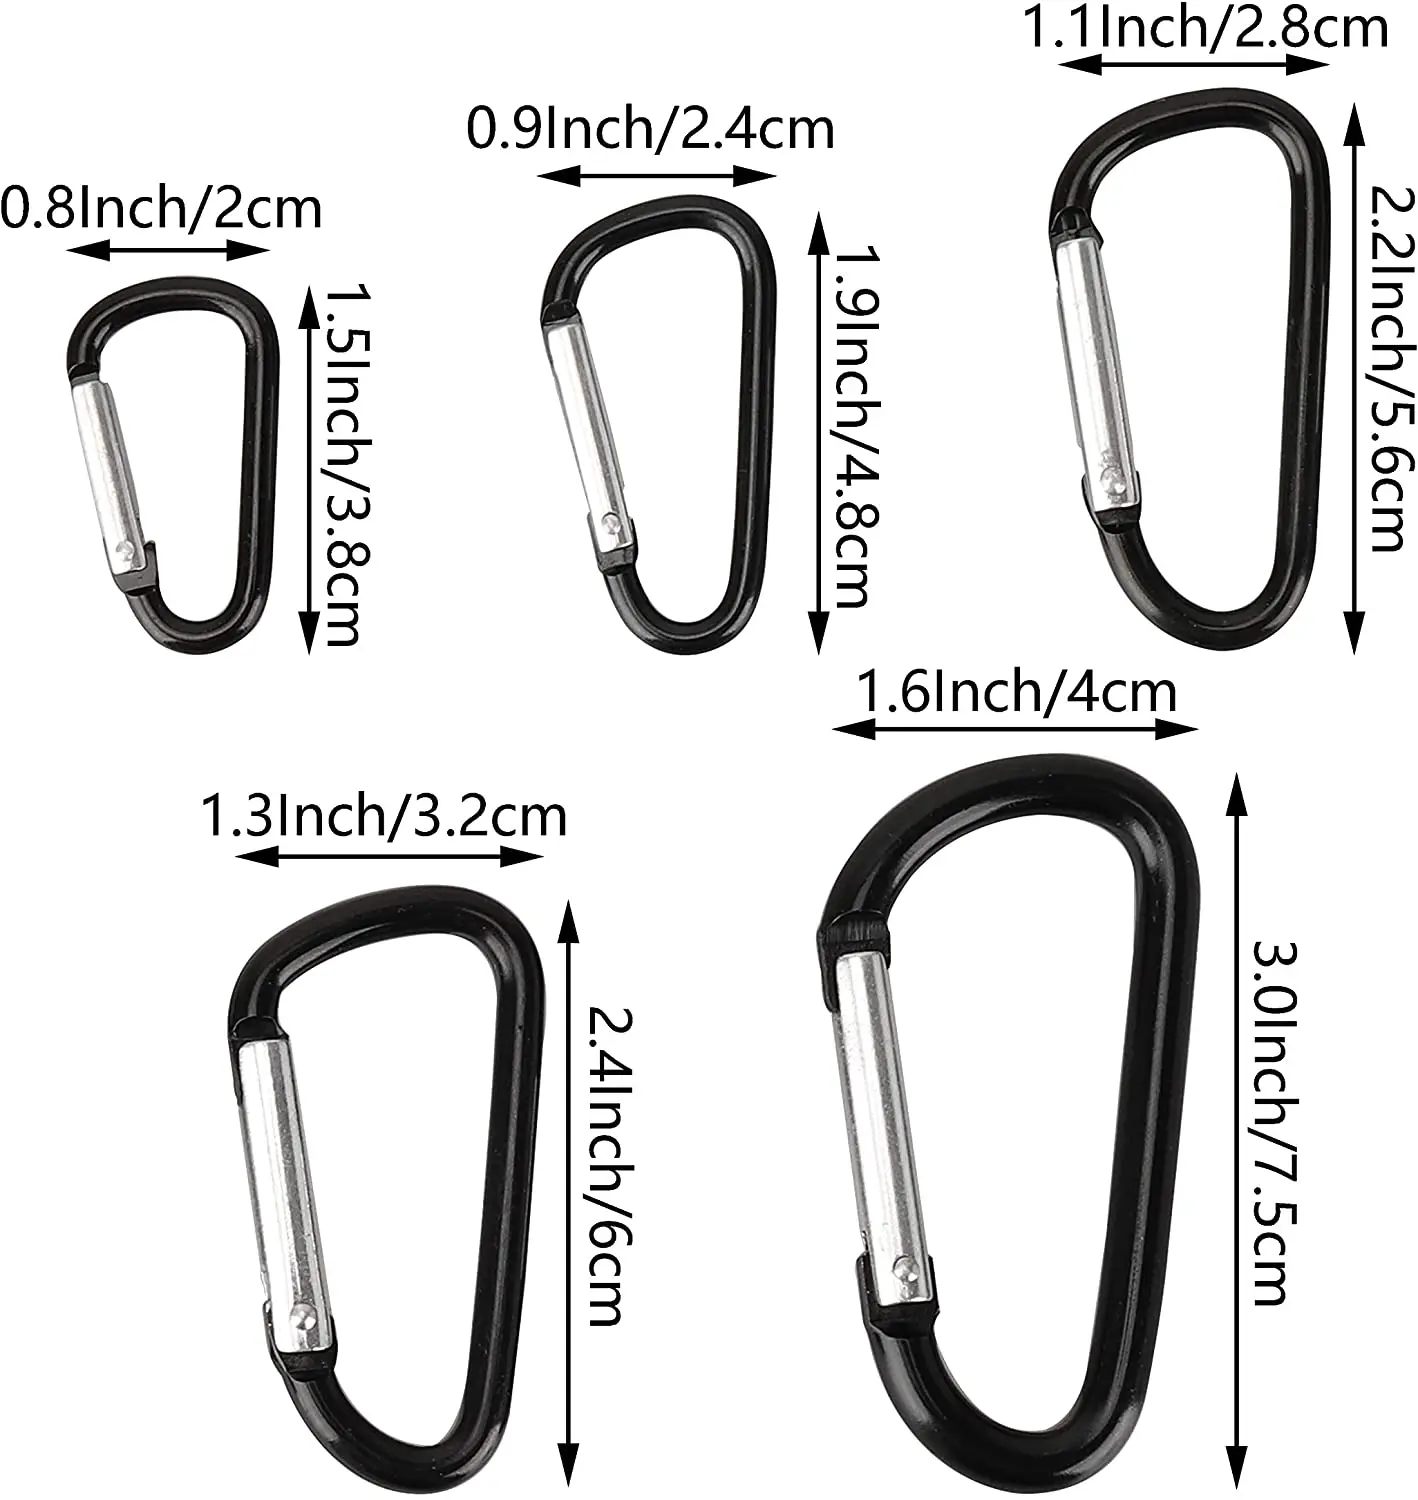 2 Aluminum D Ring Carabiners Clip D Shape Spring Loaded Gate Small Keychain Carabiner Clip Set for Outdoor Camping Mini Lock Snap Hooks Spring Link Key Chain Durable Improved 24 PCS 